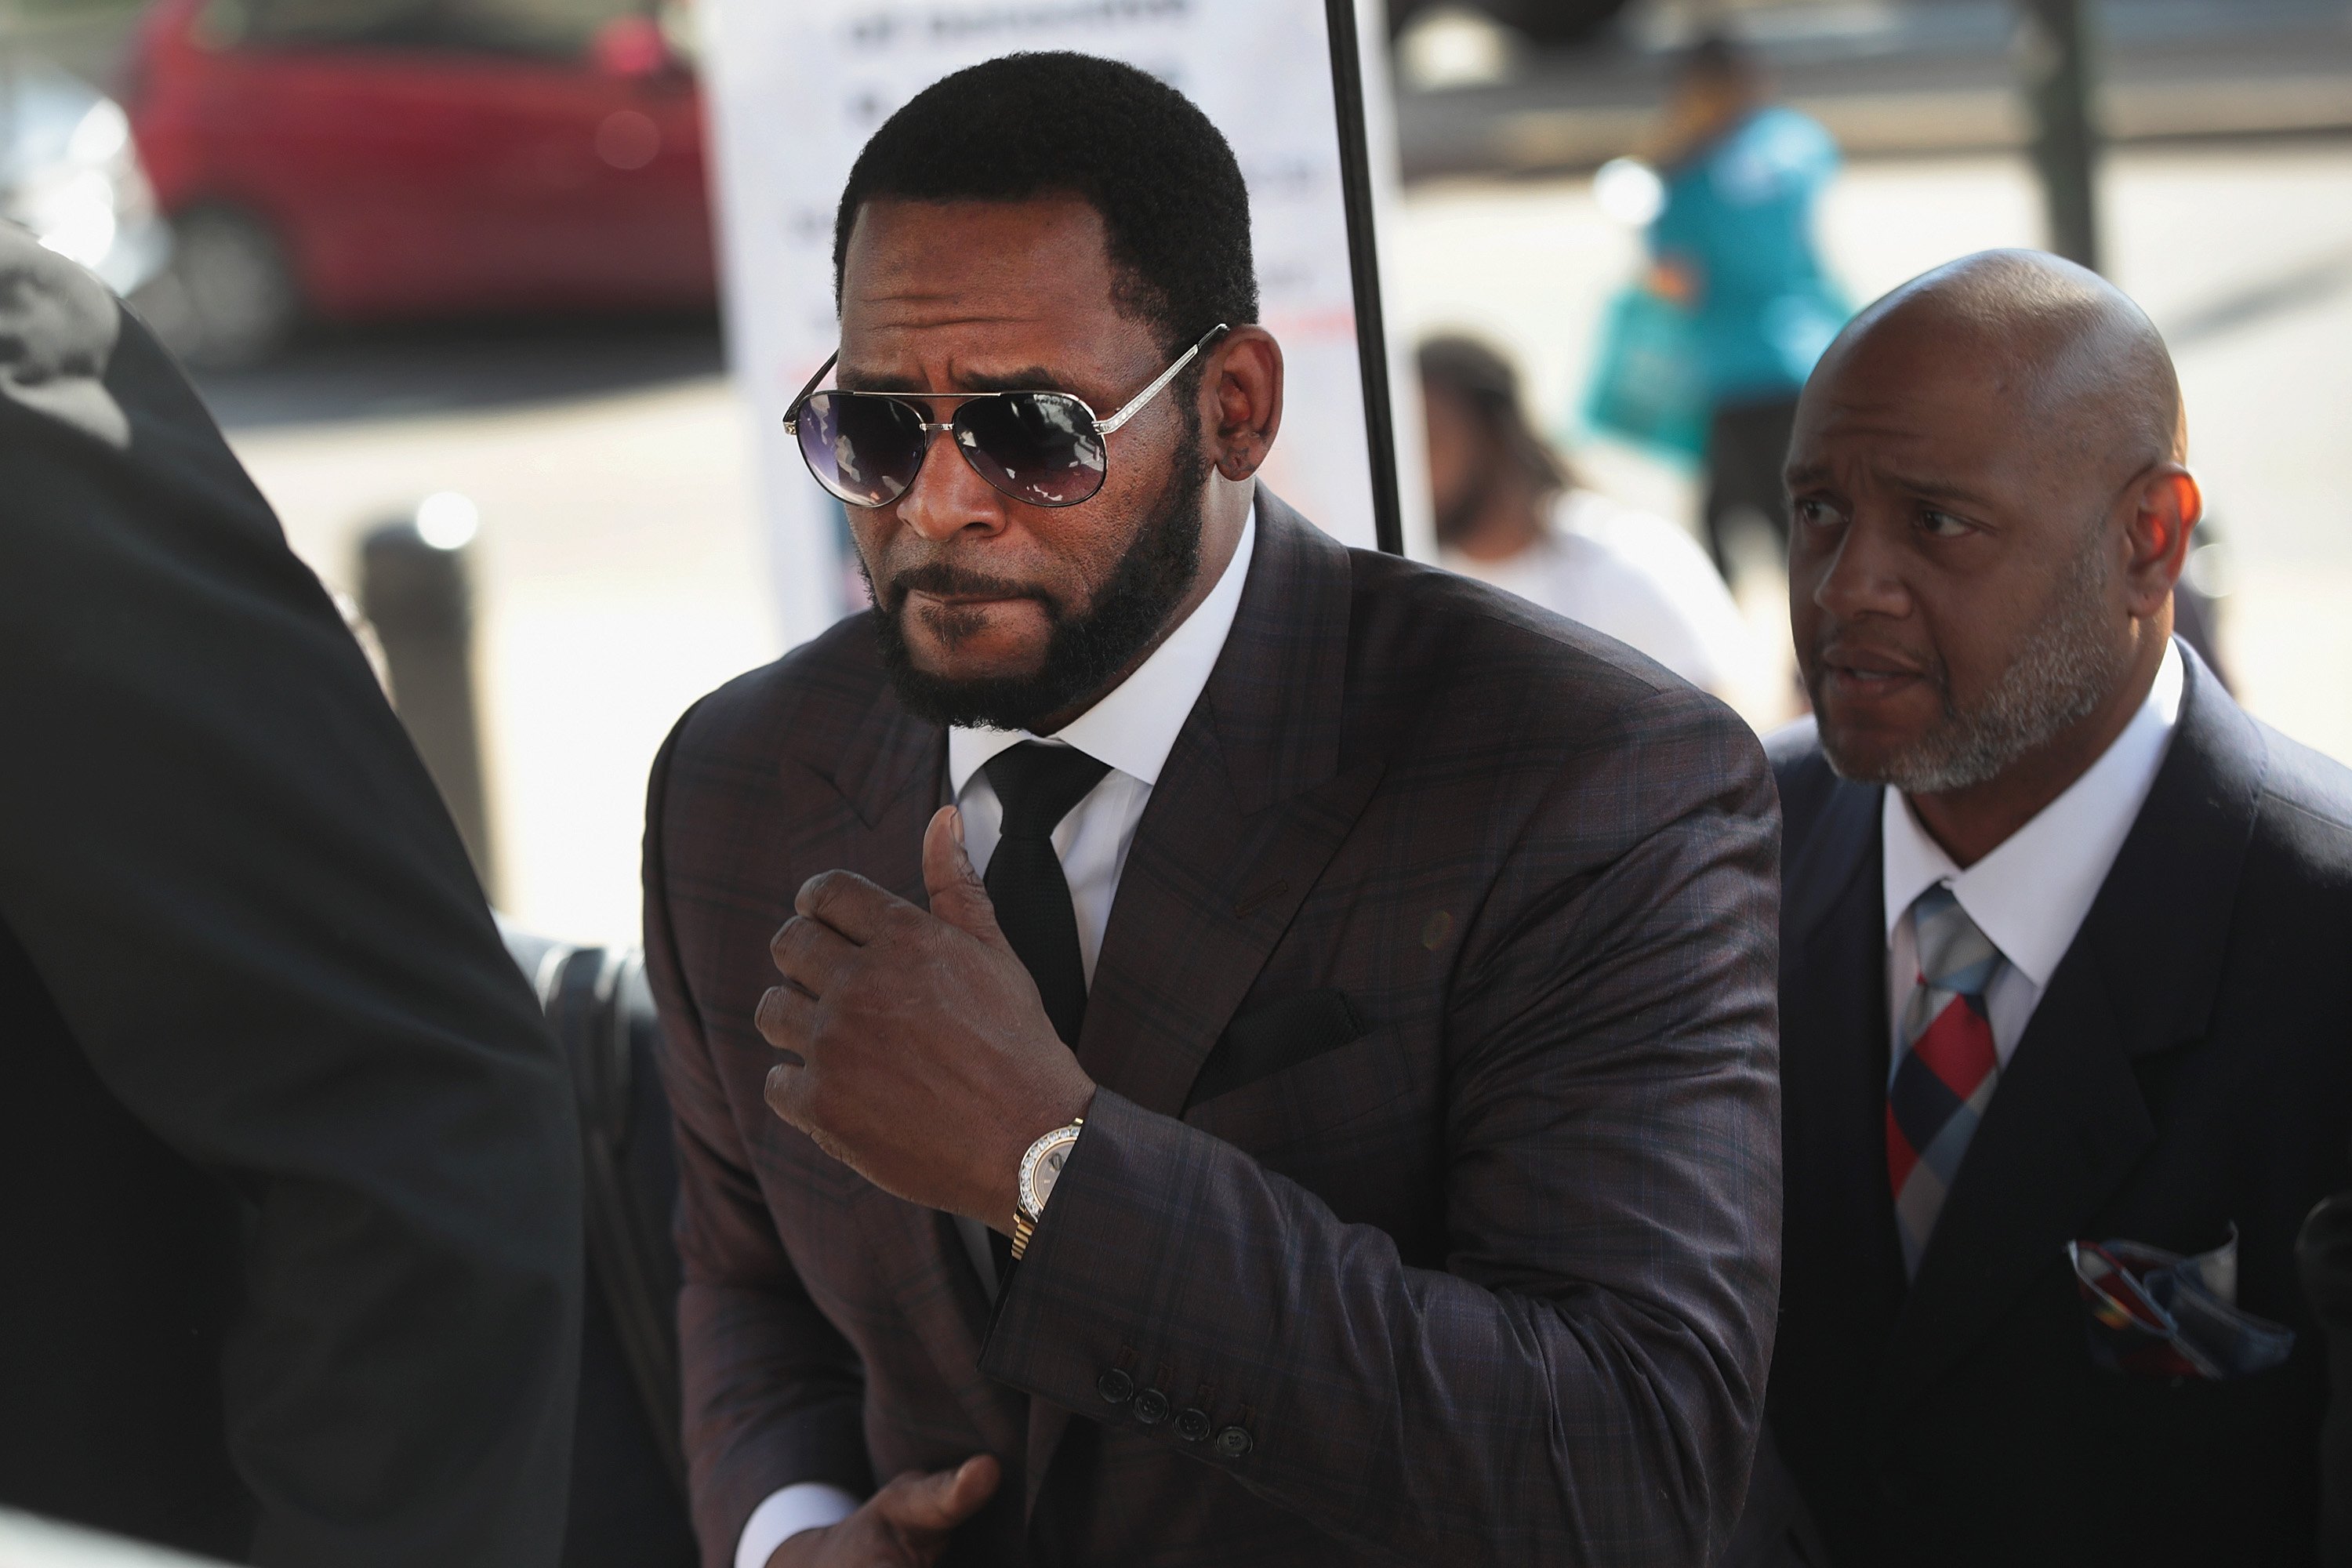 R. Kelly at court for a hearing on June 26, 2019 in Chicago, Illinois. Kelly is facing several counts of aggravated sexual abuse | Photo: Getty Images